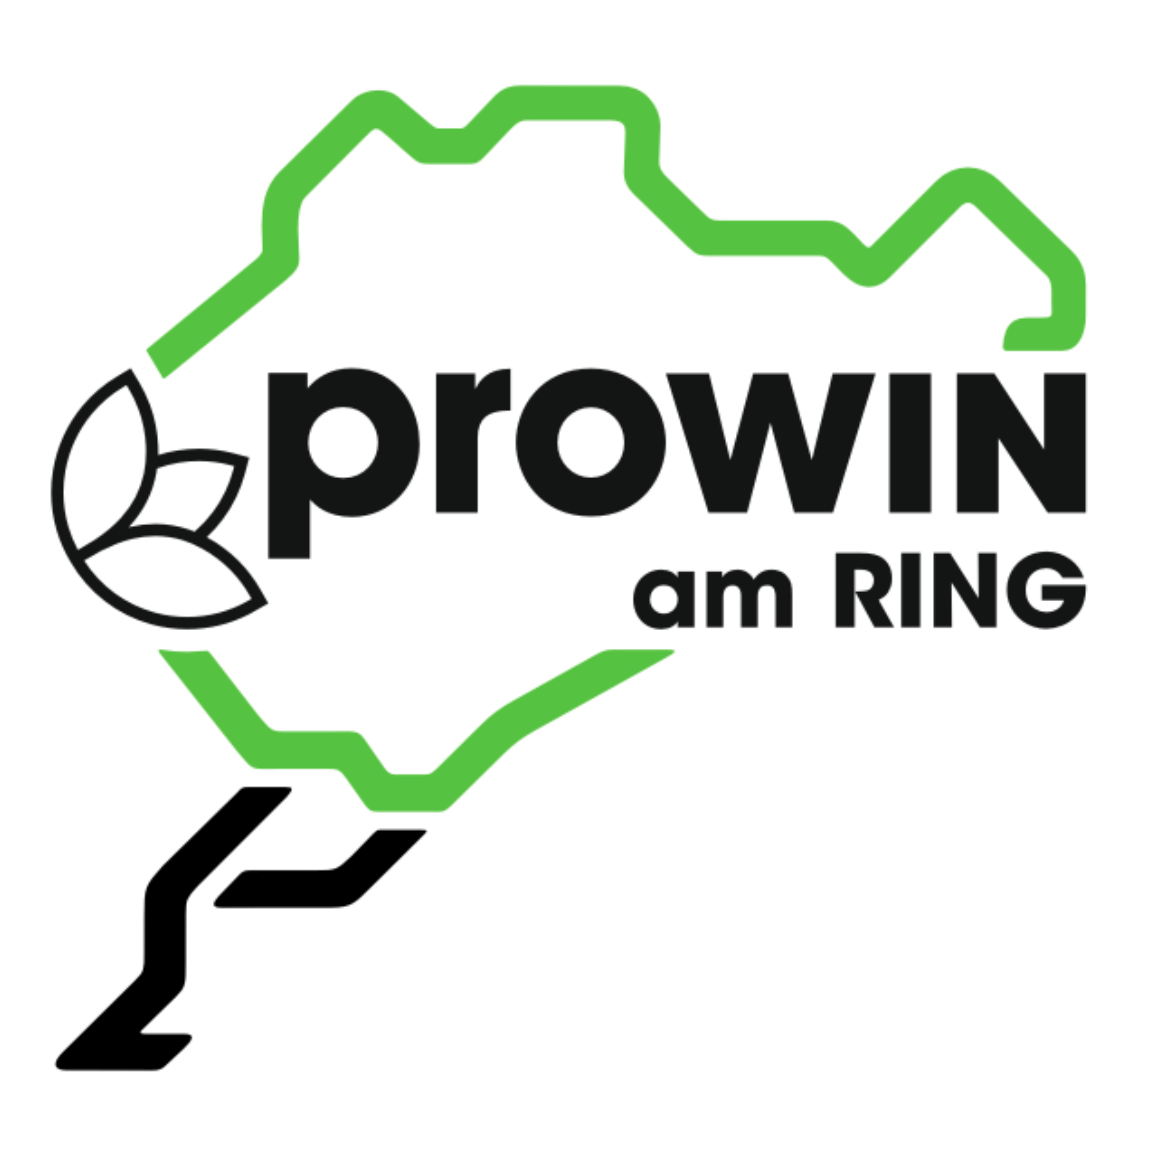 proWIN am RING